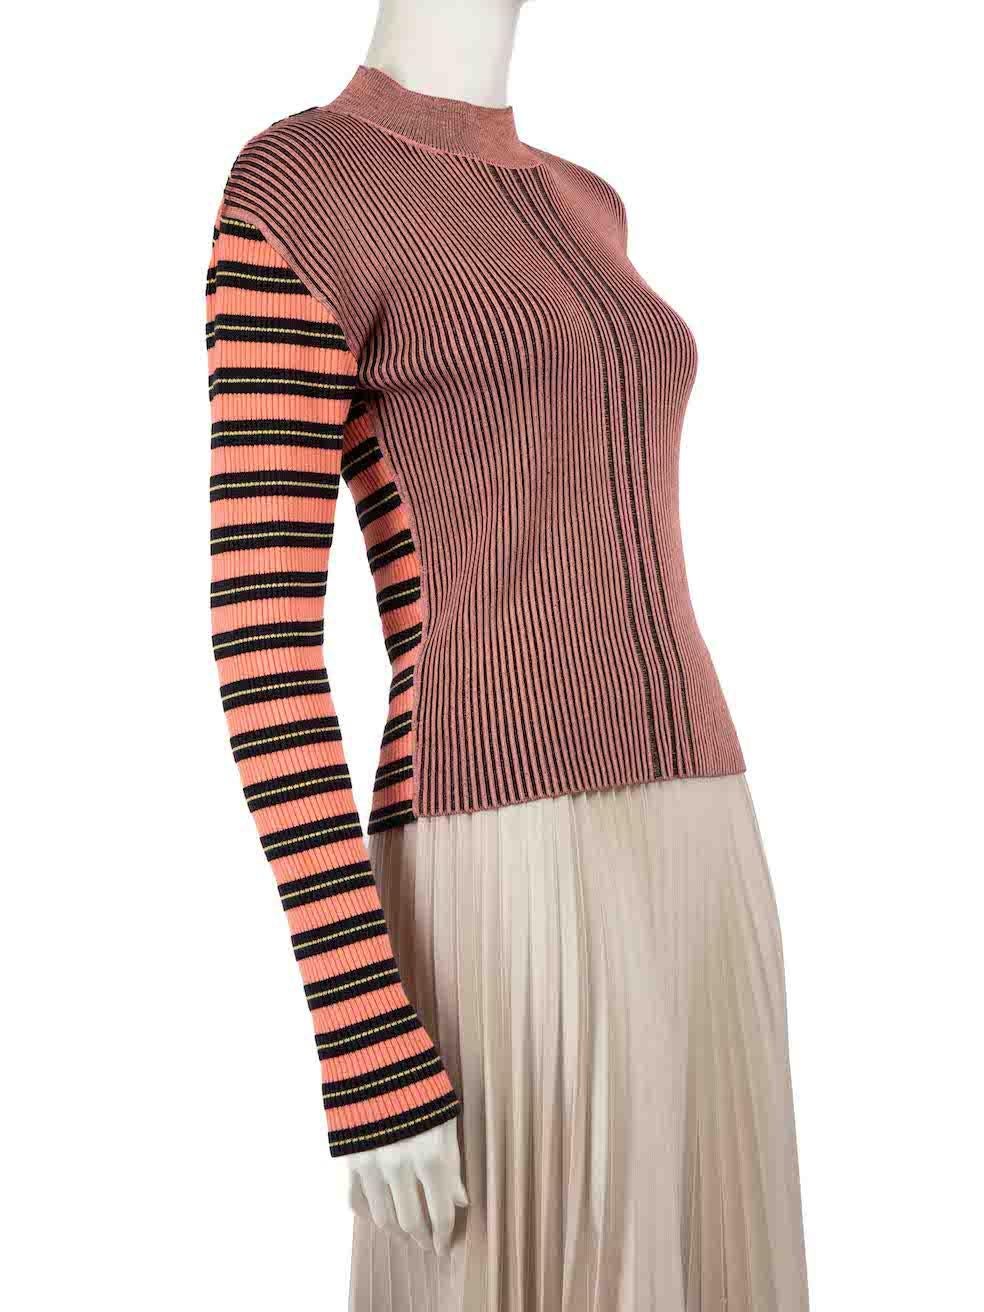 CONDITION is Very good. Minimal wear to top is evident. Minimal wear to the left sleeve cuff with a discoloured mark on this used McQ designer resale item.
 
 
 
 Details
 
 
 Pink
 
 Viscose
 
 Knit top
 
 Mock neck
 
 Striped pattern
 
 Stretchy
